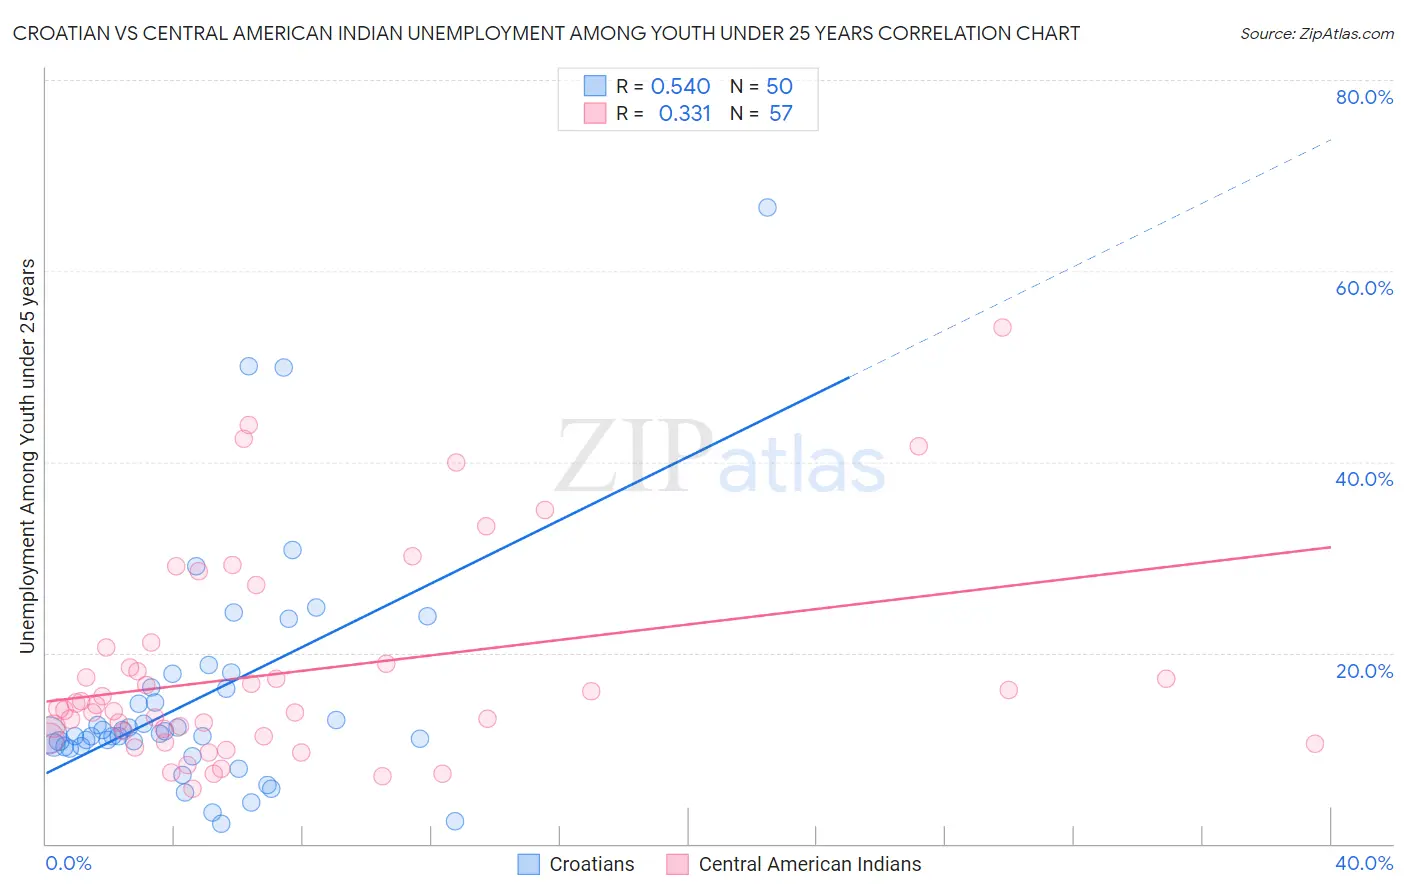 Croatian vs Central American Indian Unemployment Among Youth under 25 years